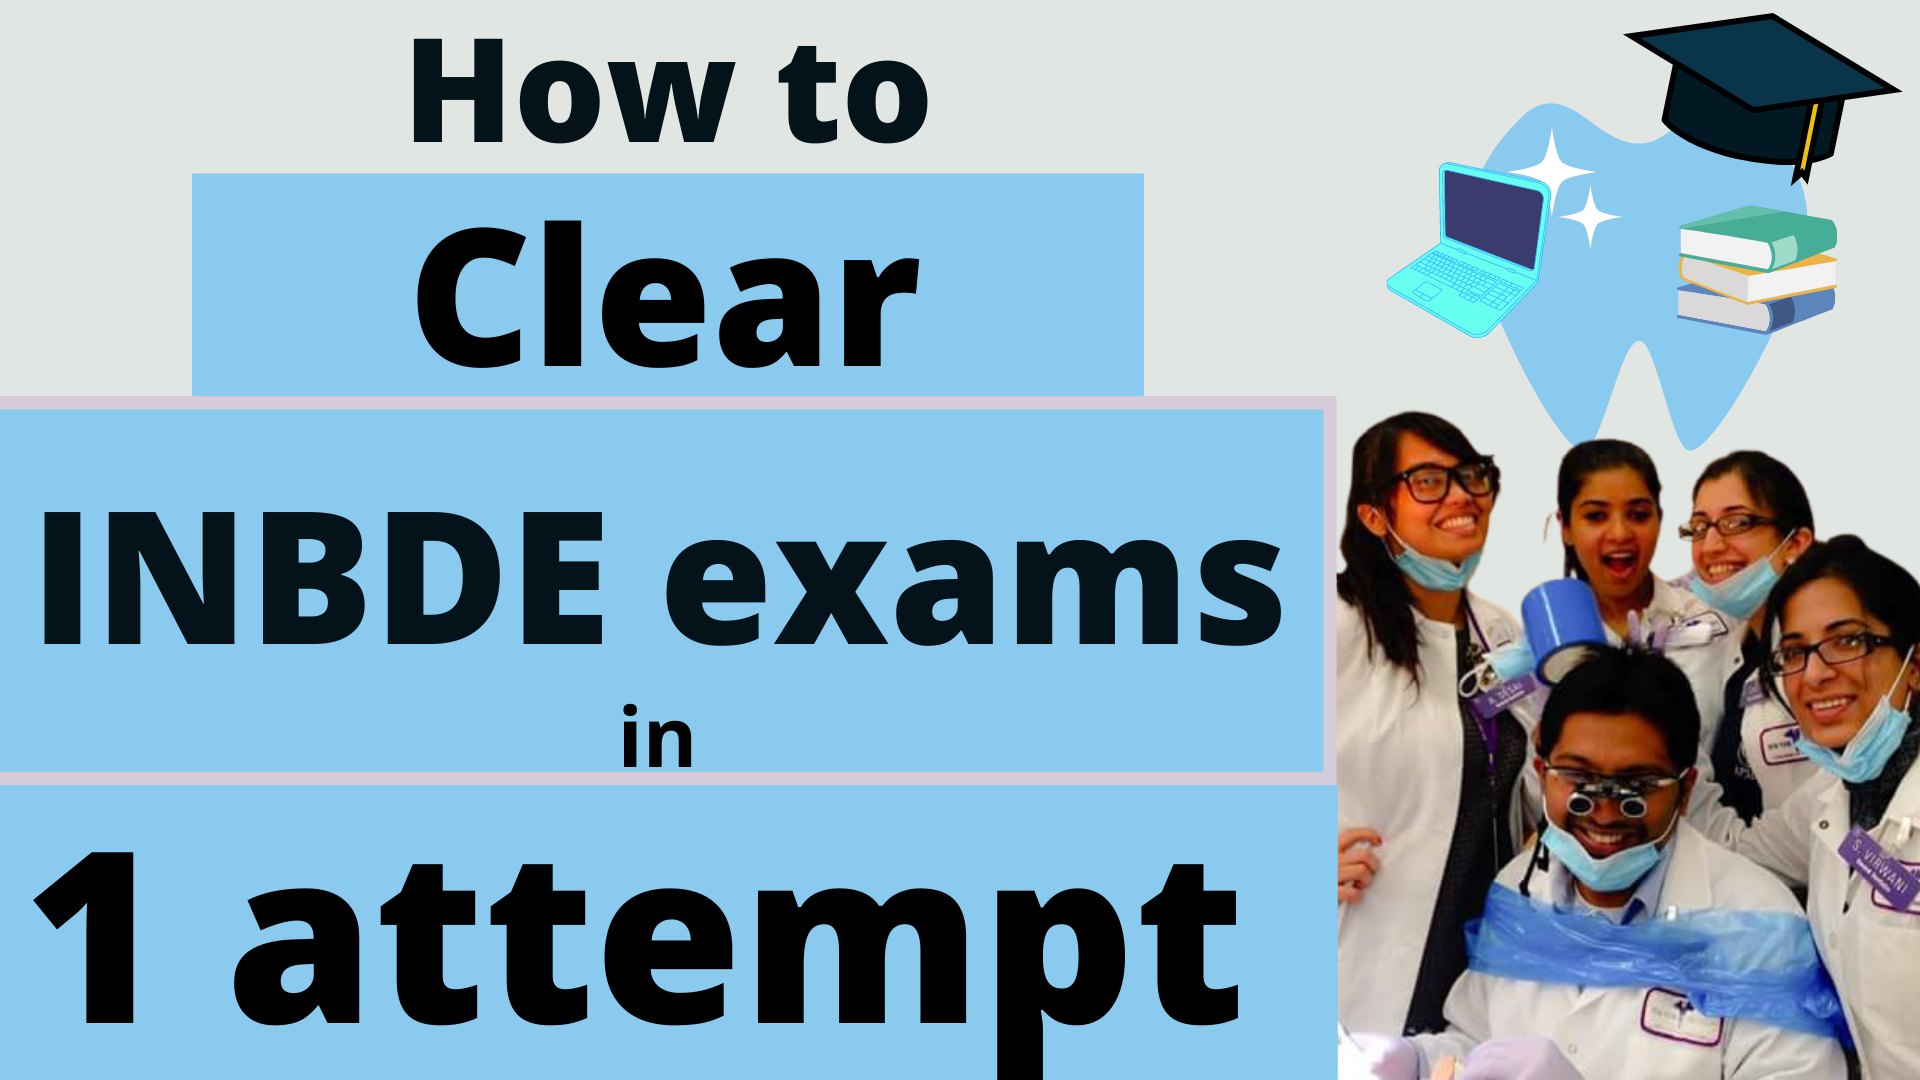 How to study for the national dental boards / INBDE exams